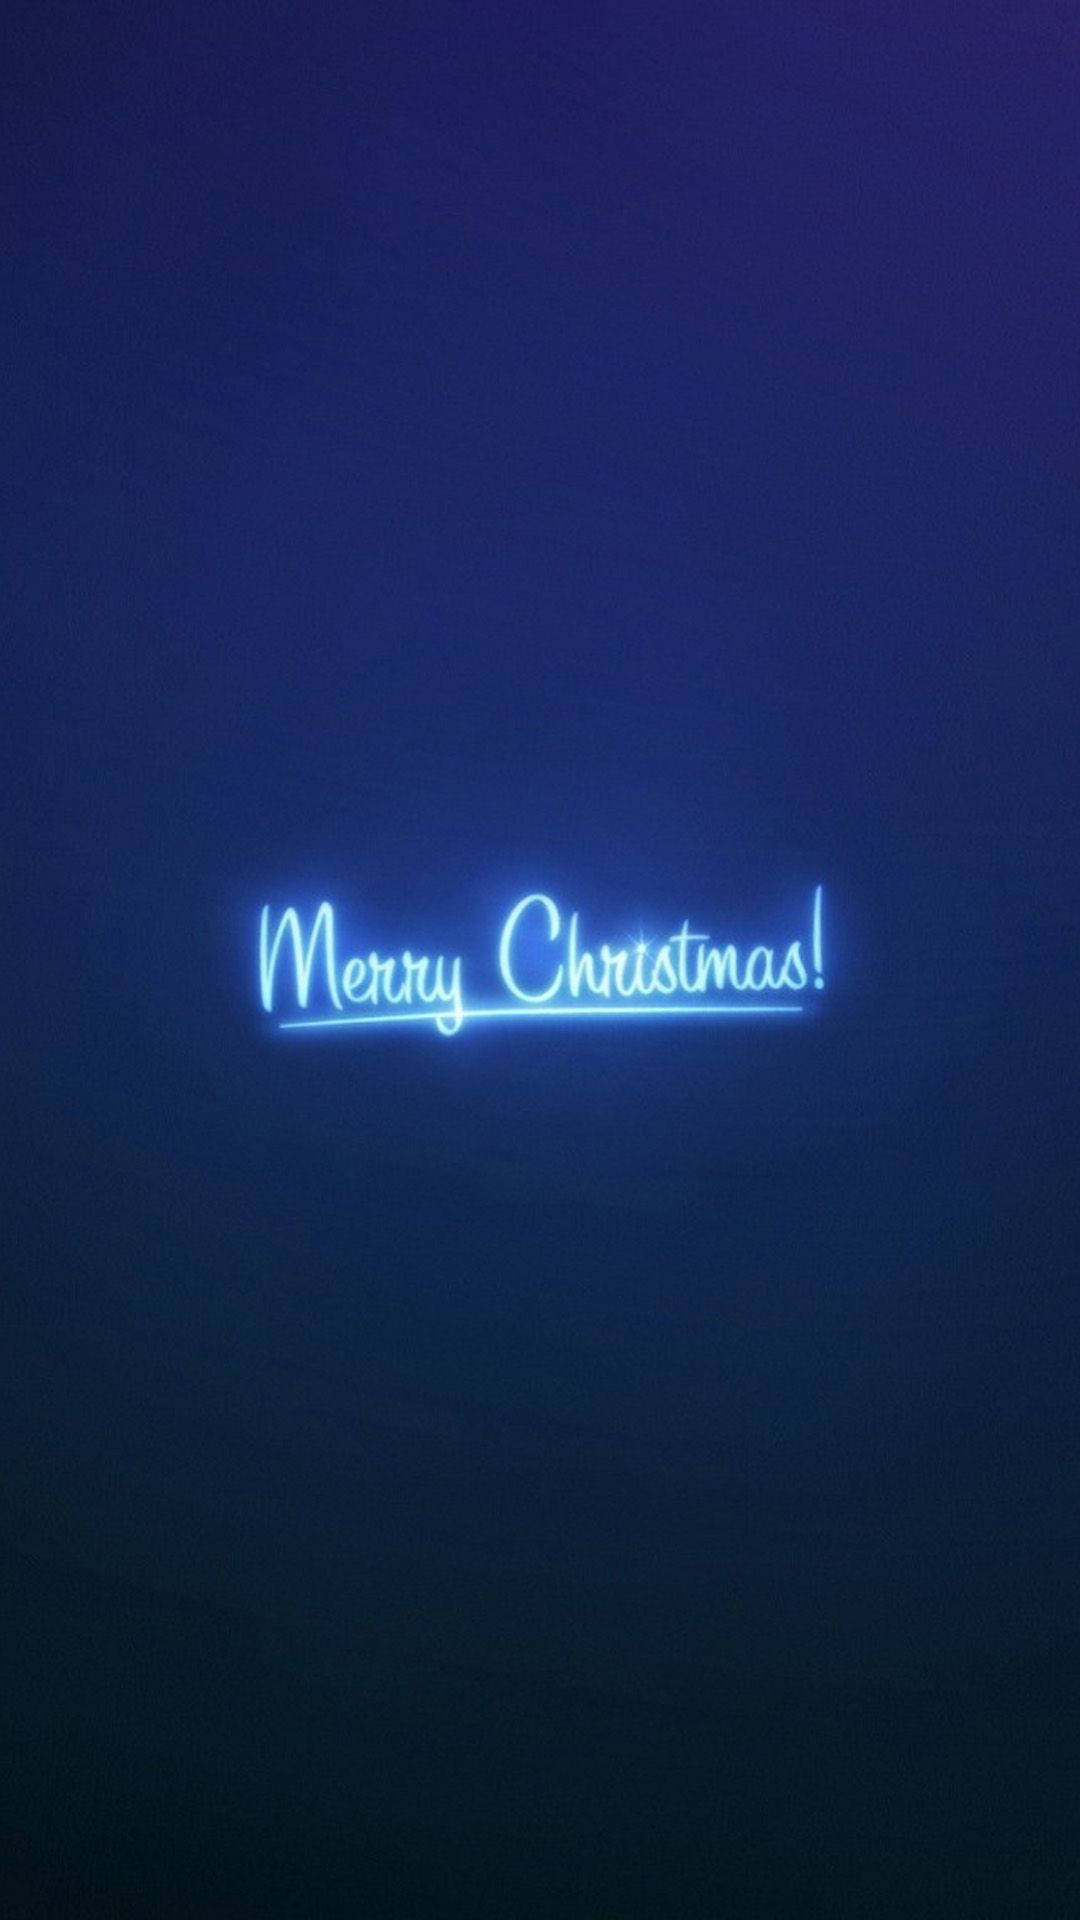 Merry Christmas On Neon Blue iPhone Wallpaper